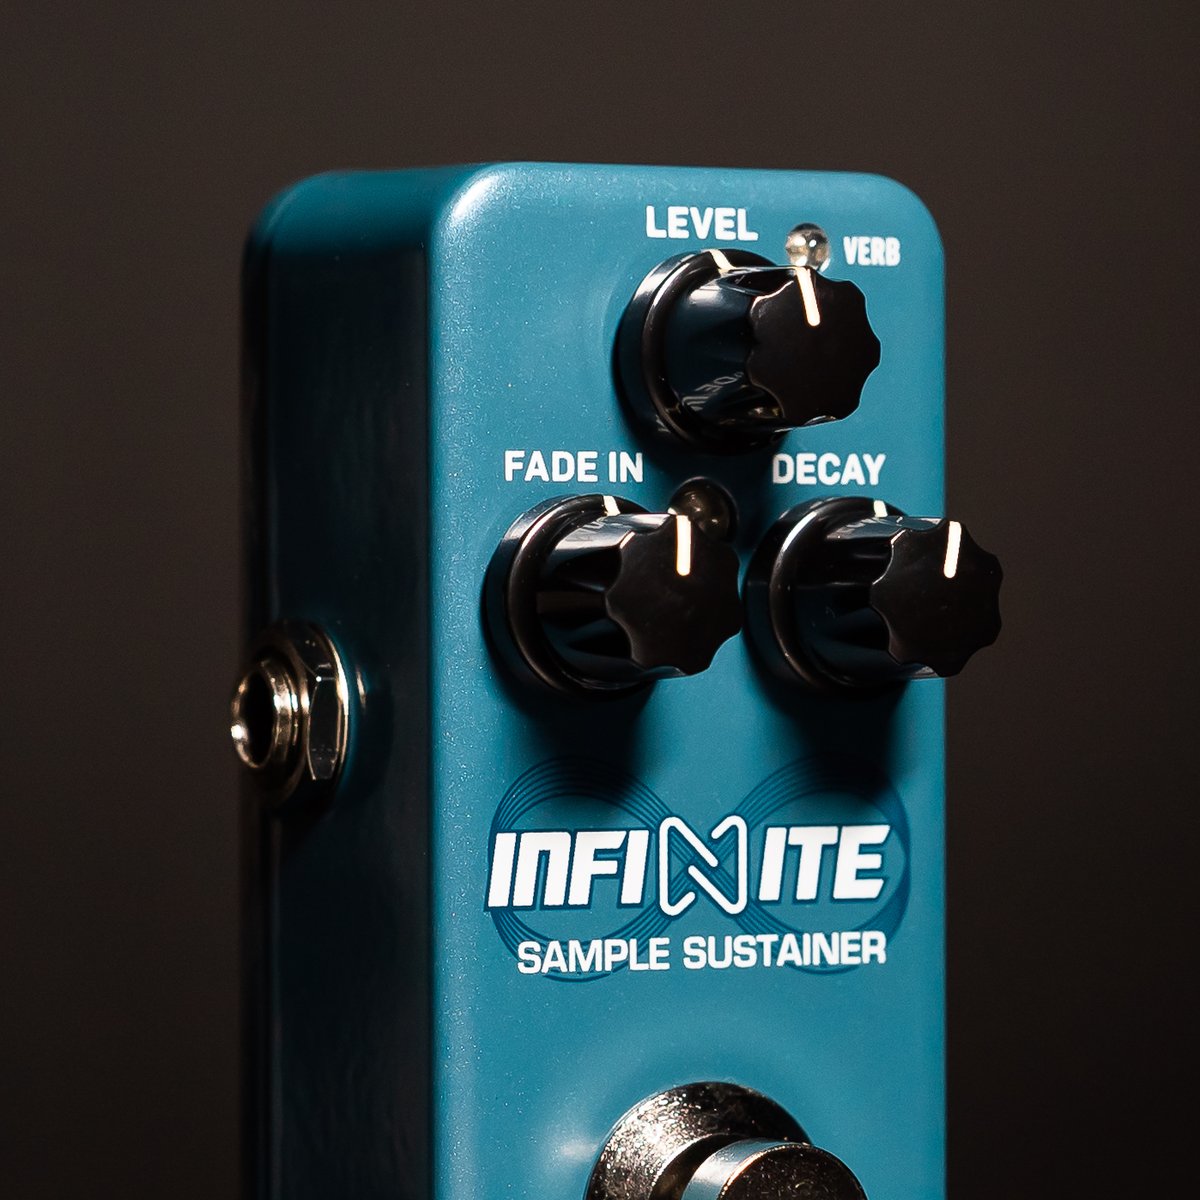 INFINITE MINI has dedicated FADE IN and DECAY knobs, giving you complete control over how the stacked notes and chords will interact.

#tcelectronic #infinitesamplesustainer #infiniteminipedal #guitarpedal #toneprint #knowyourtone